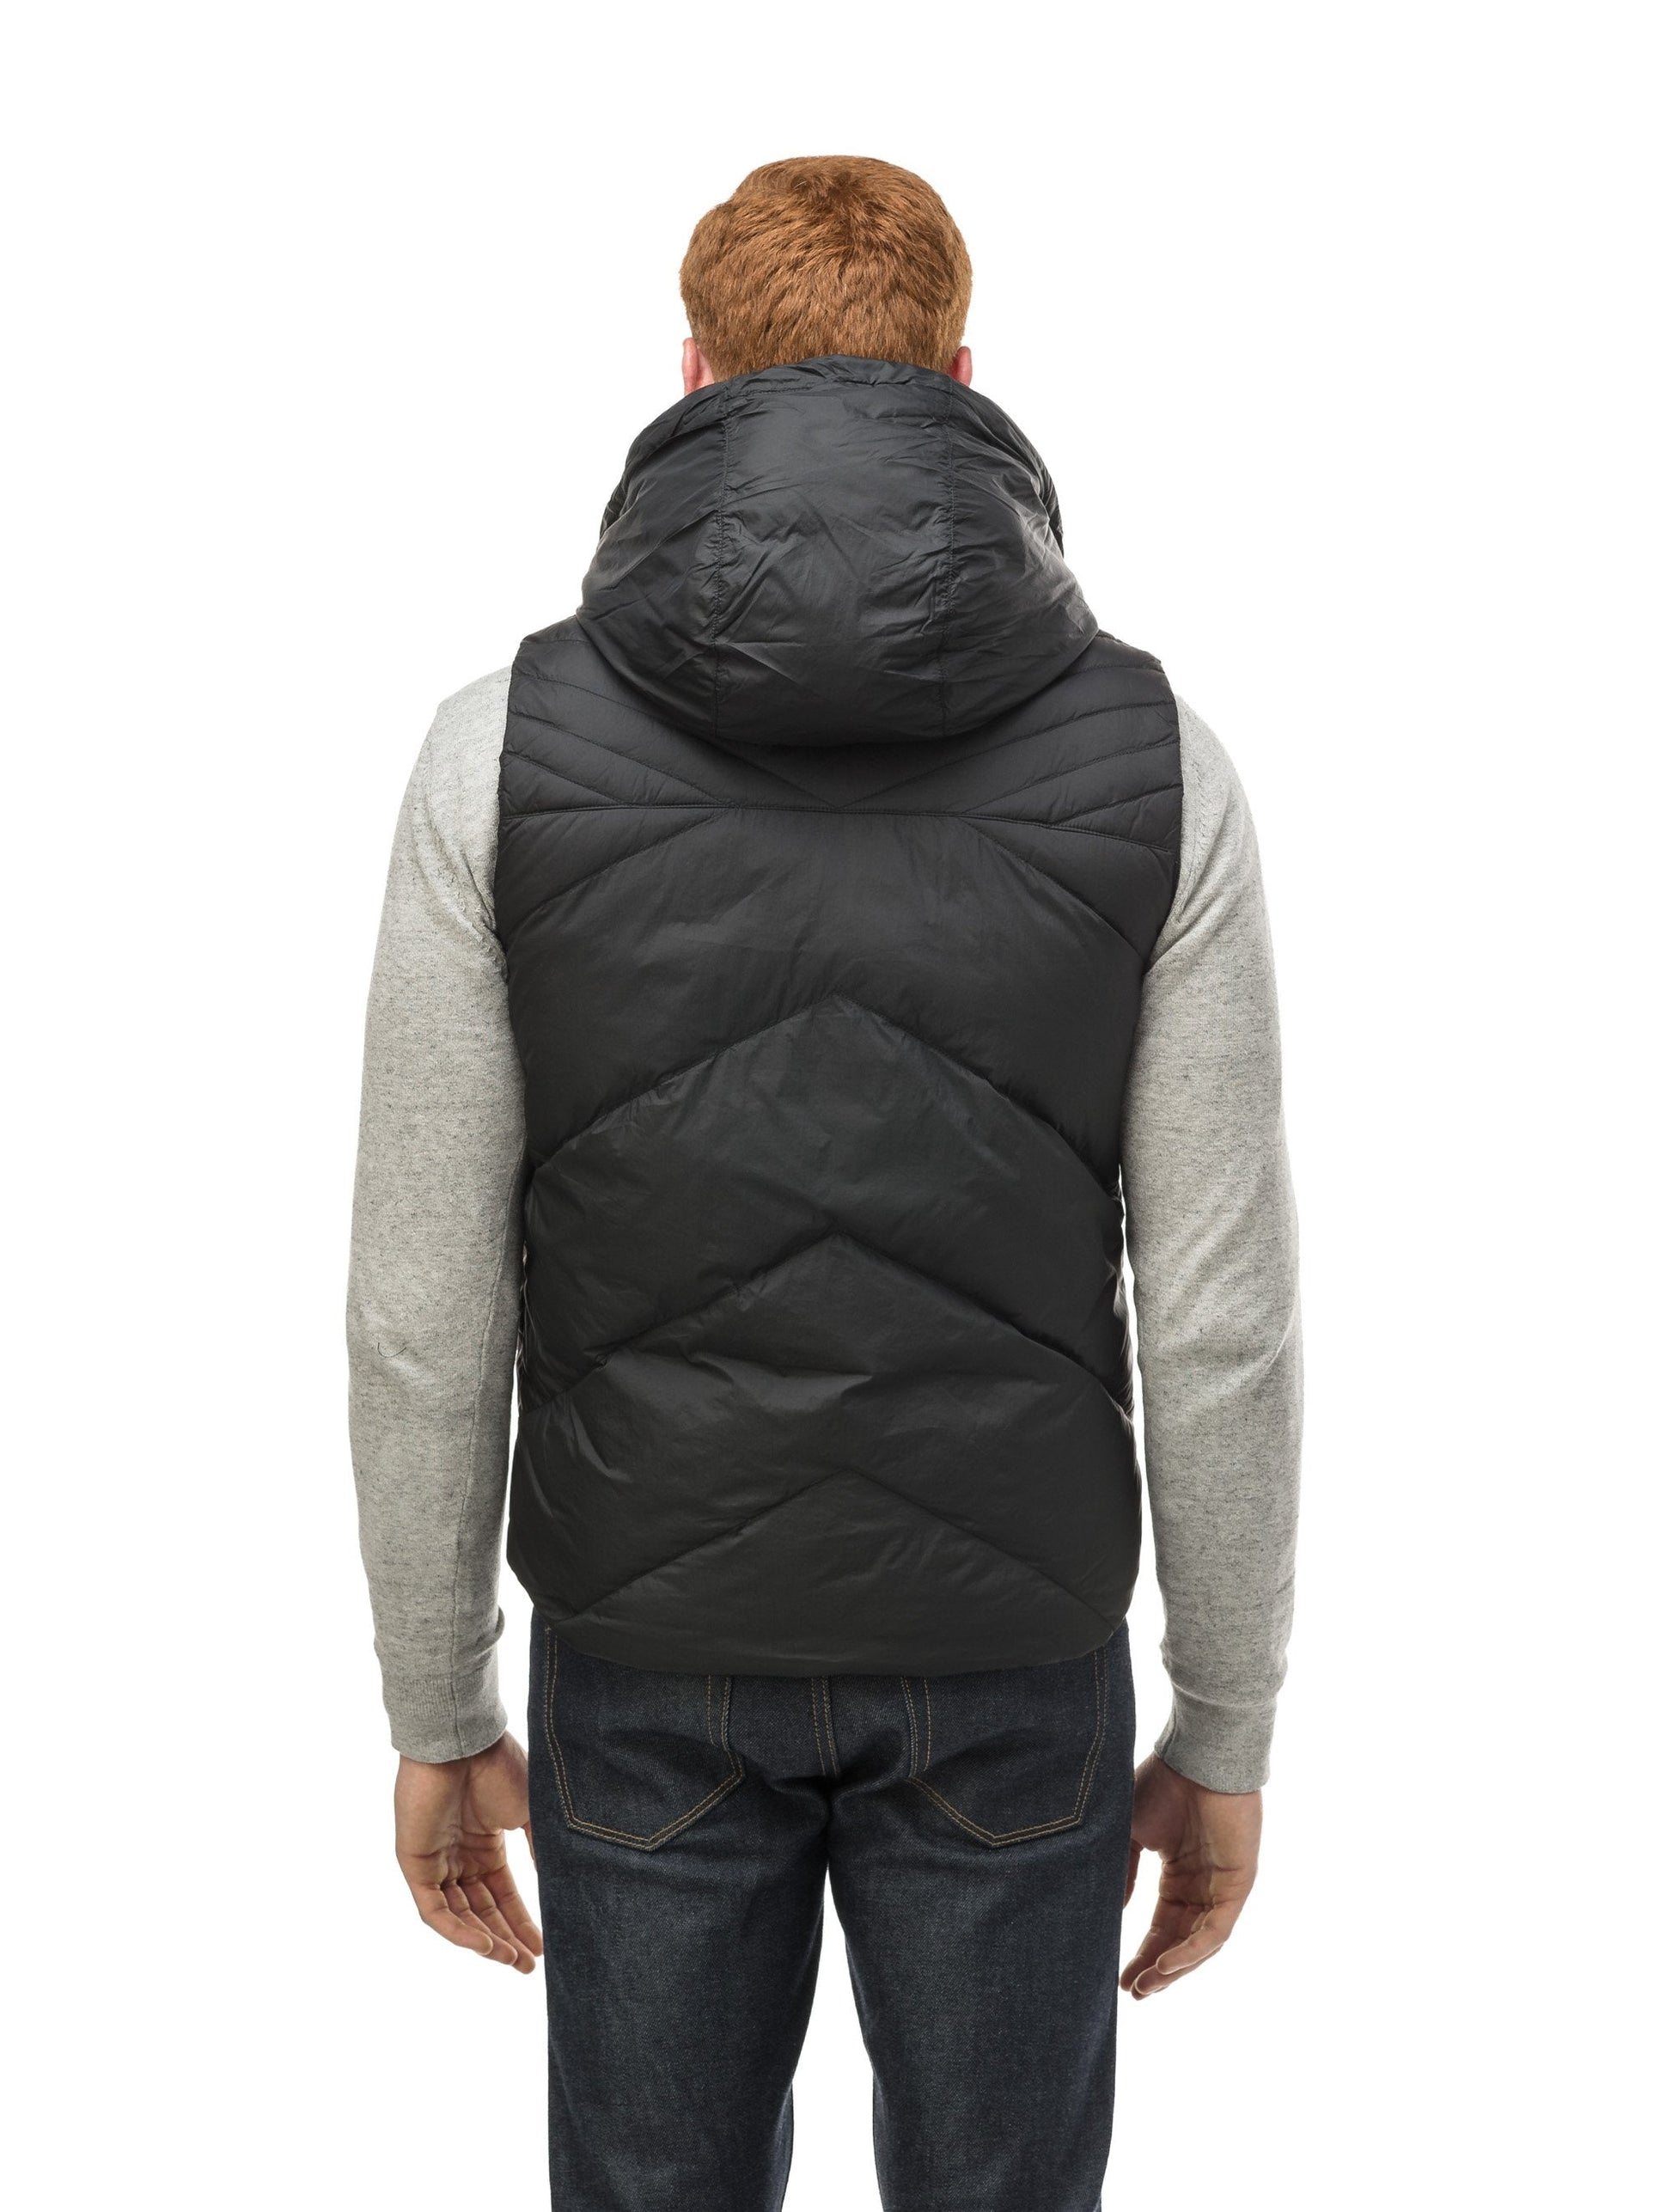 Men's lightweight vest with accents like our removable hood and chevron quilting in Black